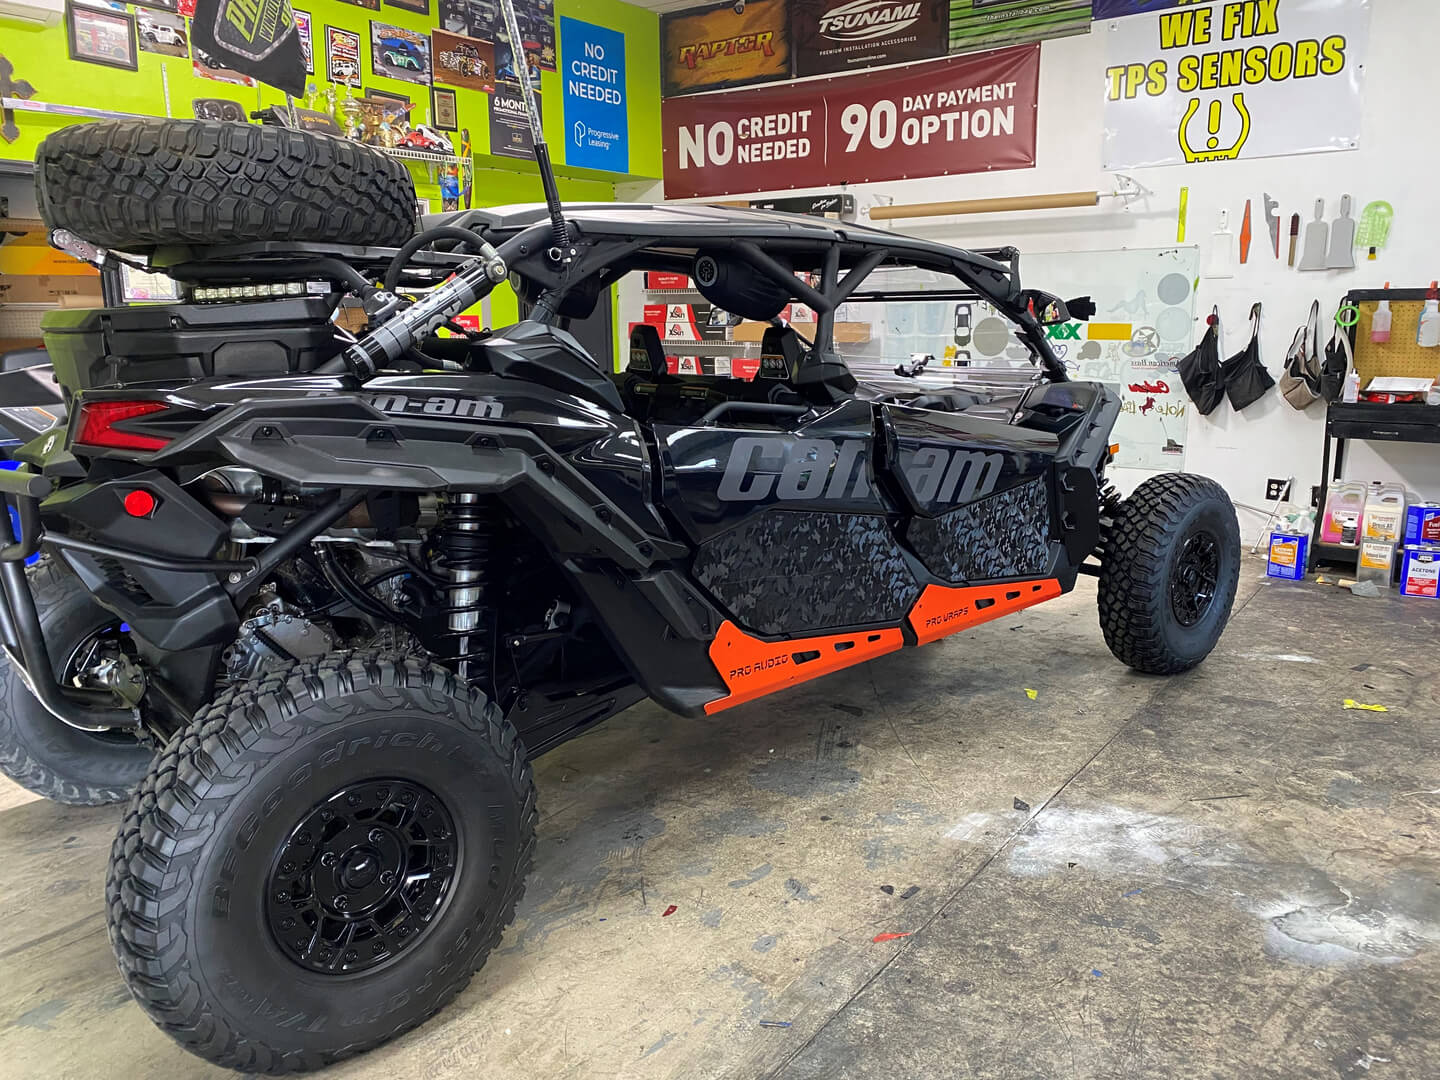 An Upgraded Can AM Maverick In Grey and Black